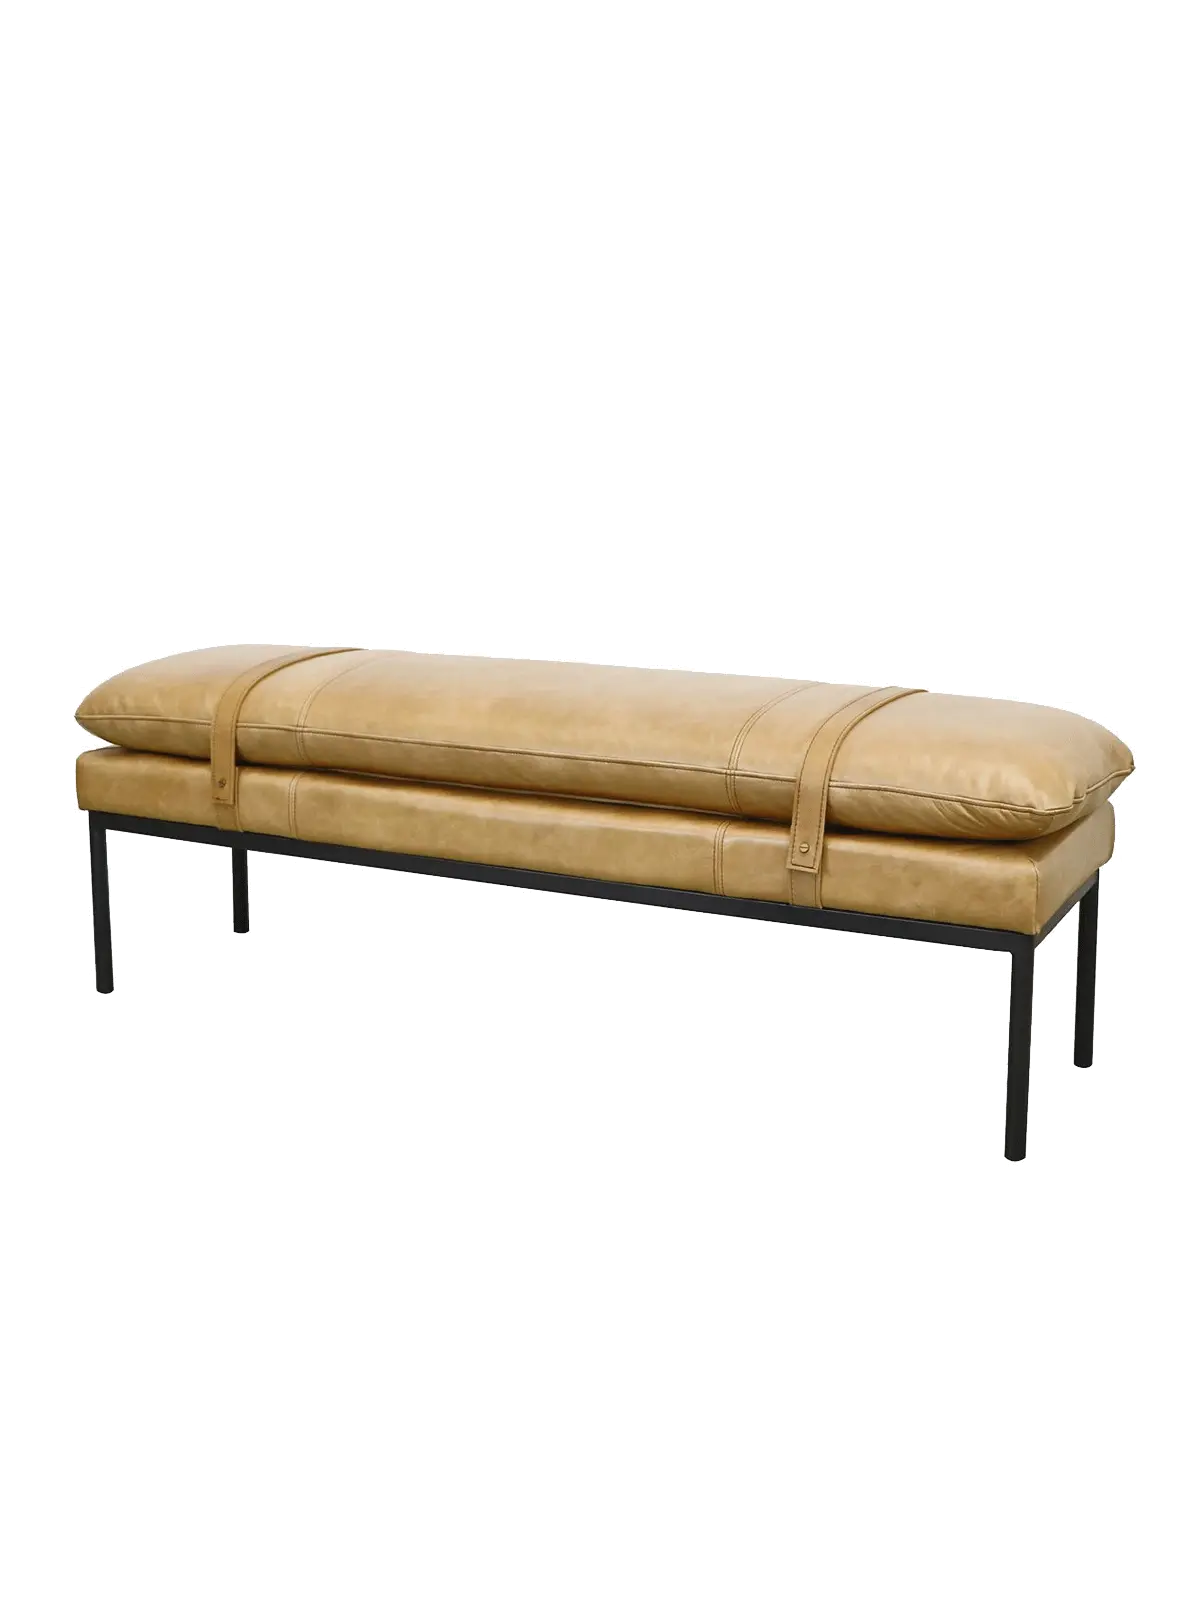 Baxter Leather Bench / Ottoman Hawthorne Group